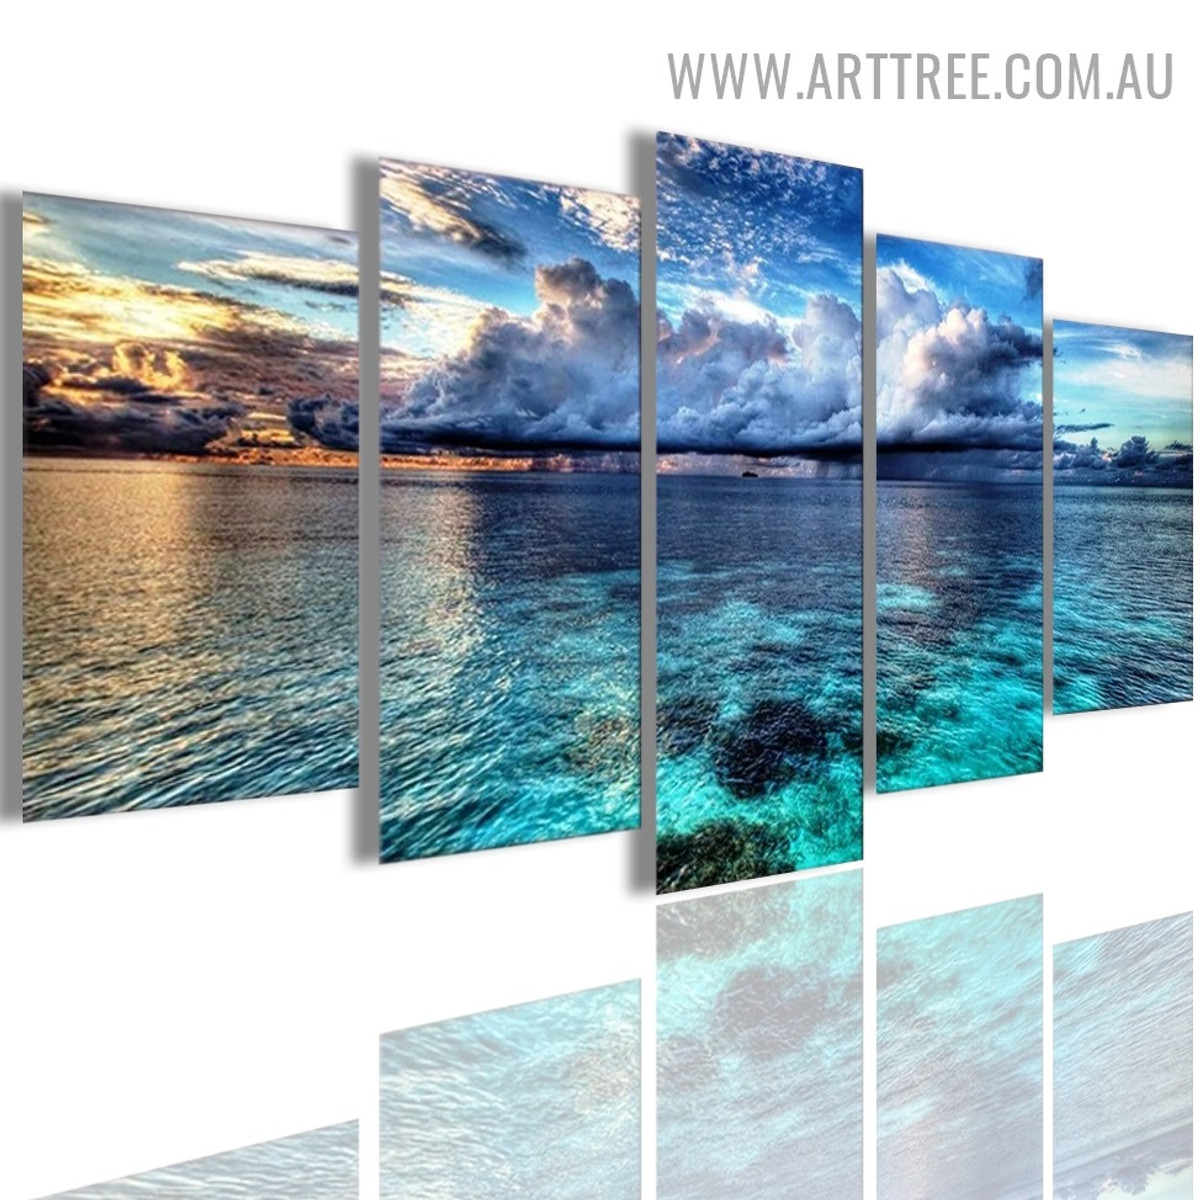 Blue Ocean Water Waves Modern 5 Multi Panel Naturesape Image Canvas Painting Print for Room Wall Ornament